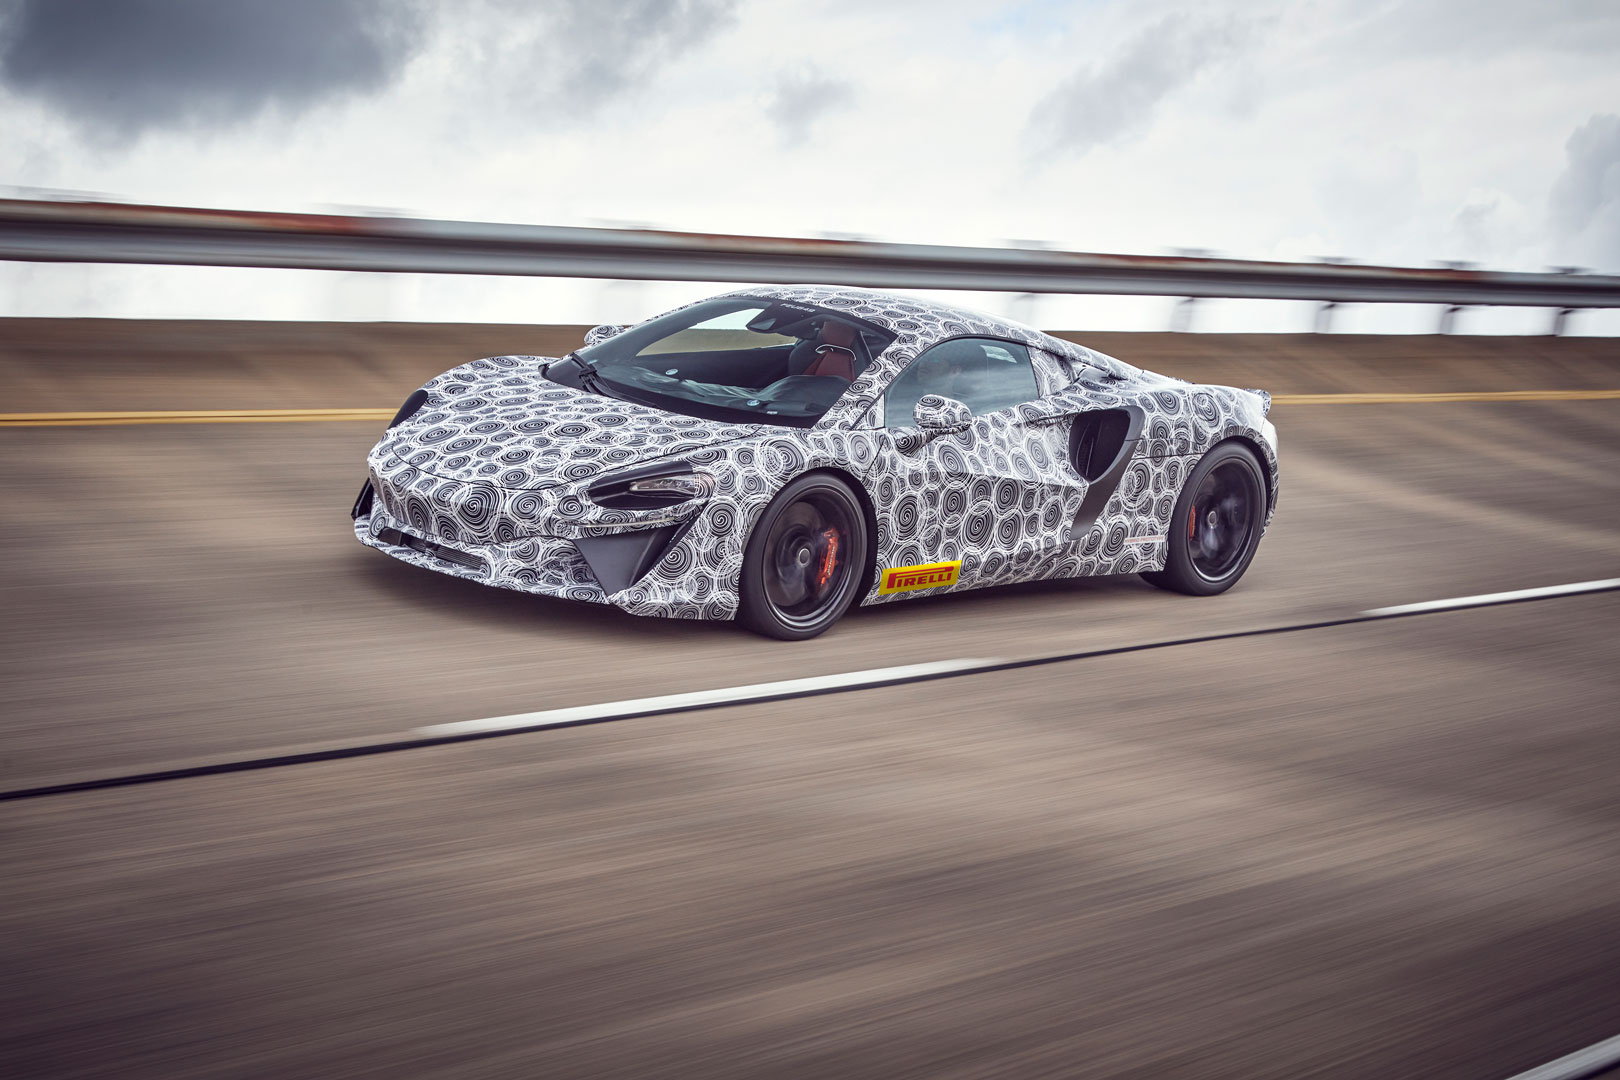 McLaren Hybrid Supercar enters the final stages of testing